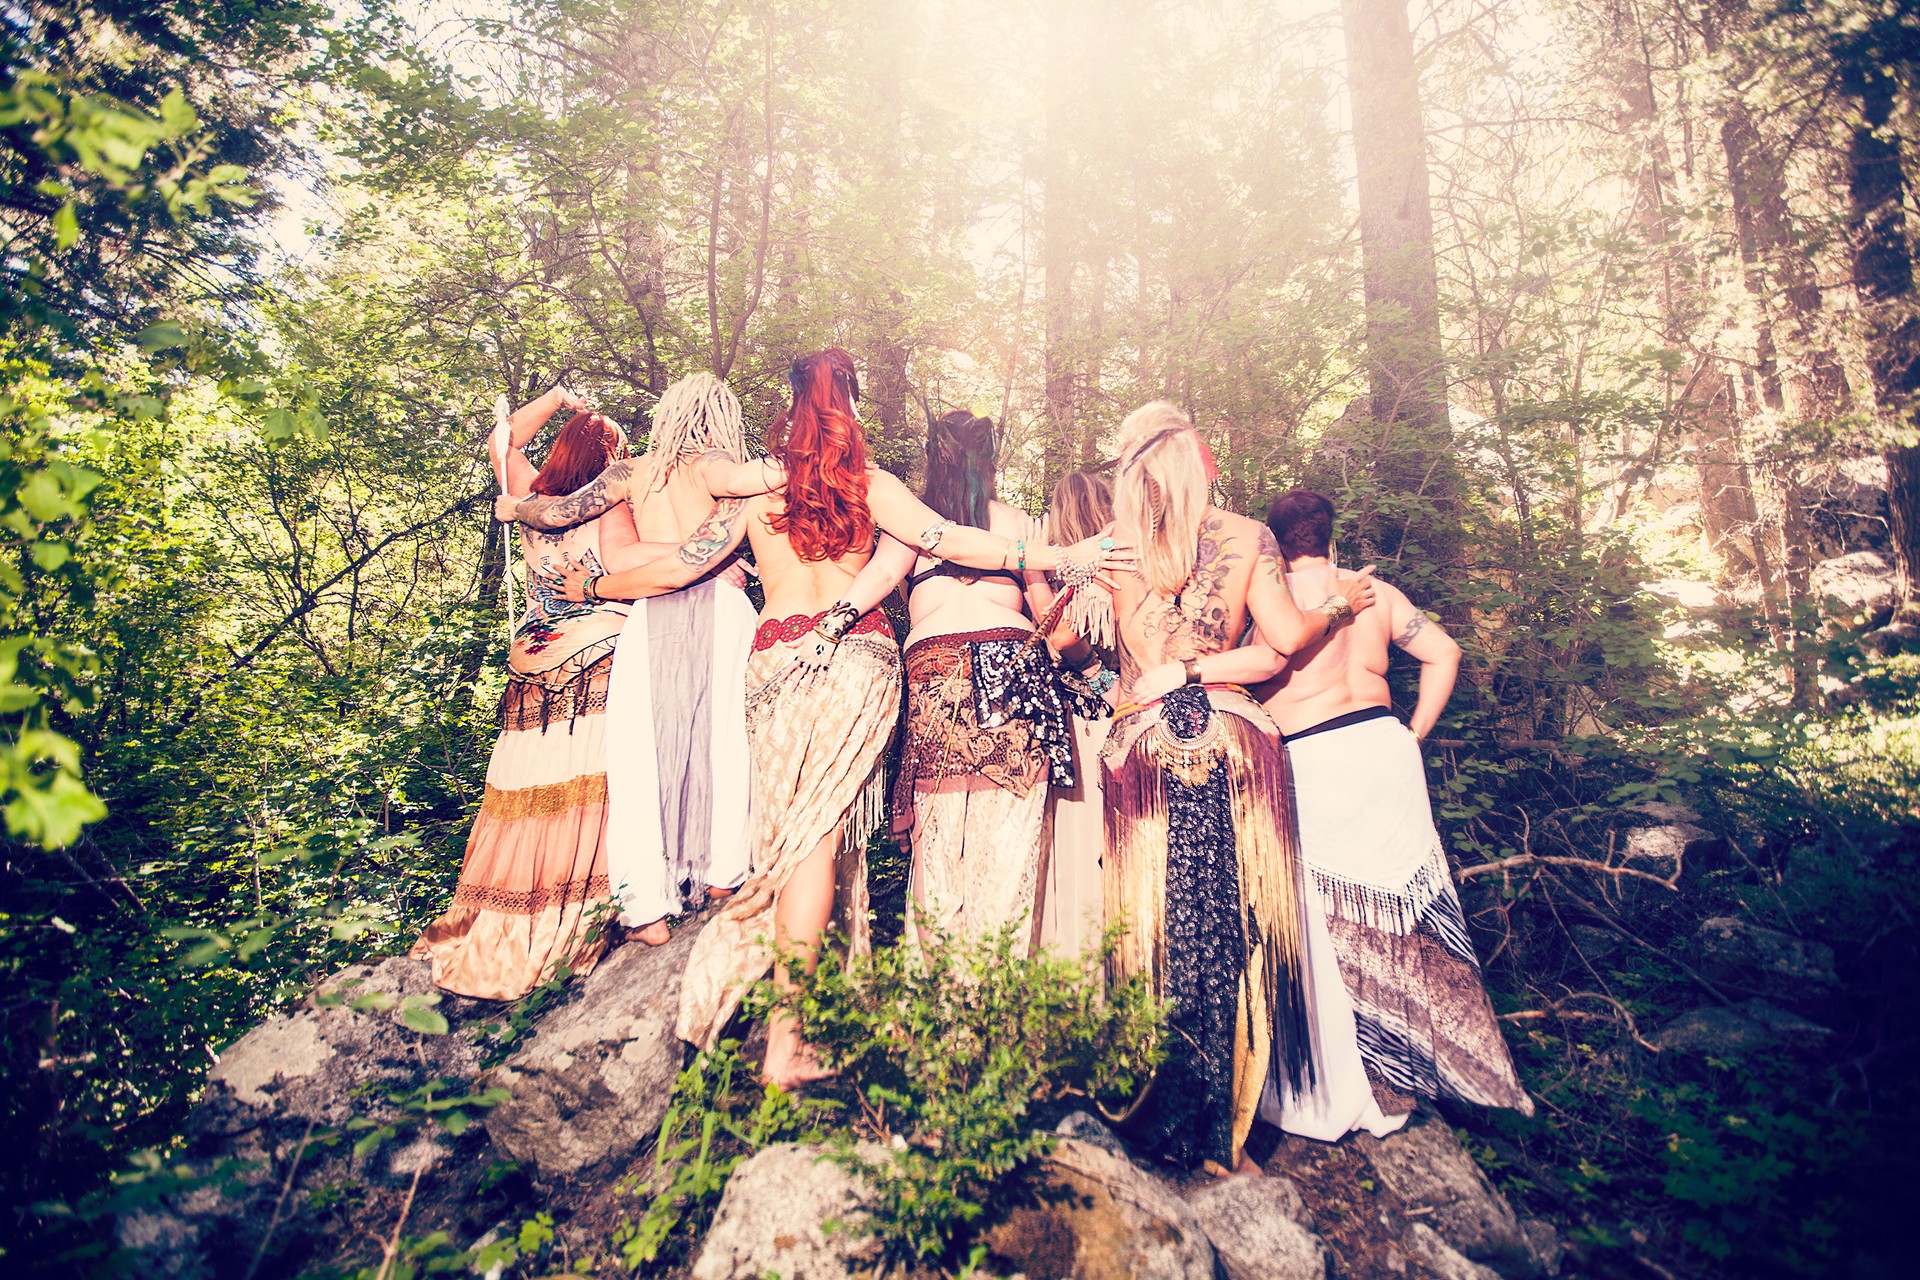 Tribal Belly Dancers in the Woods